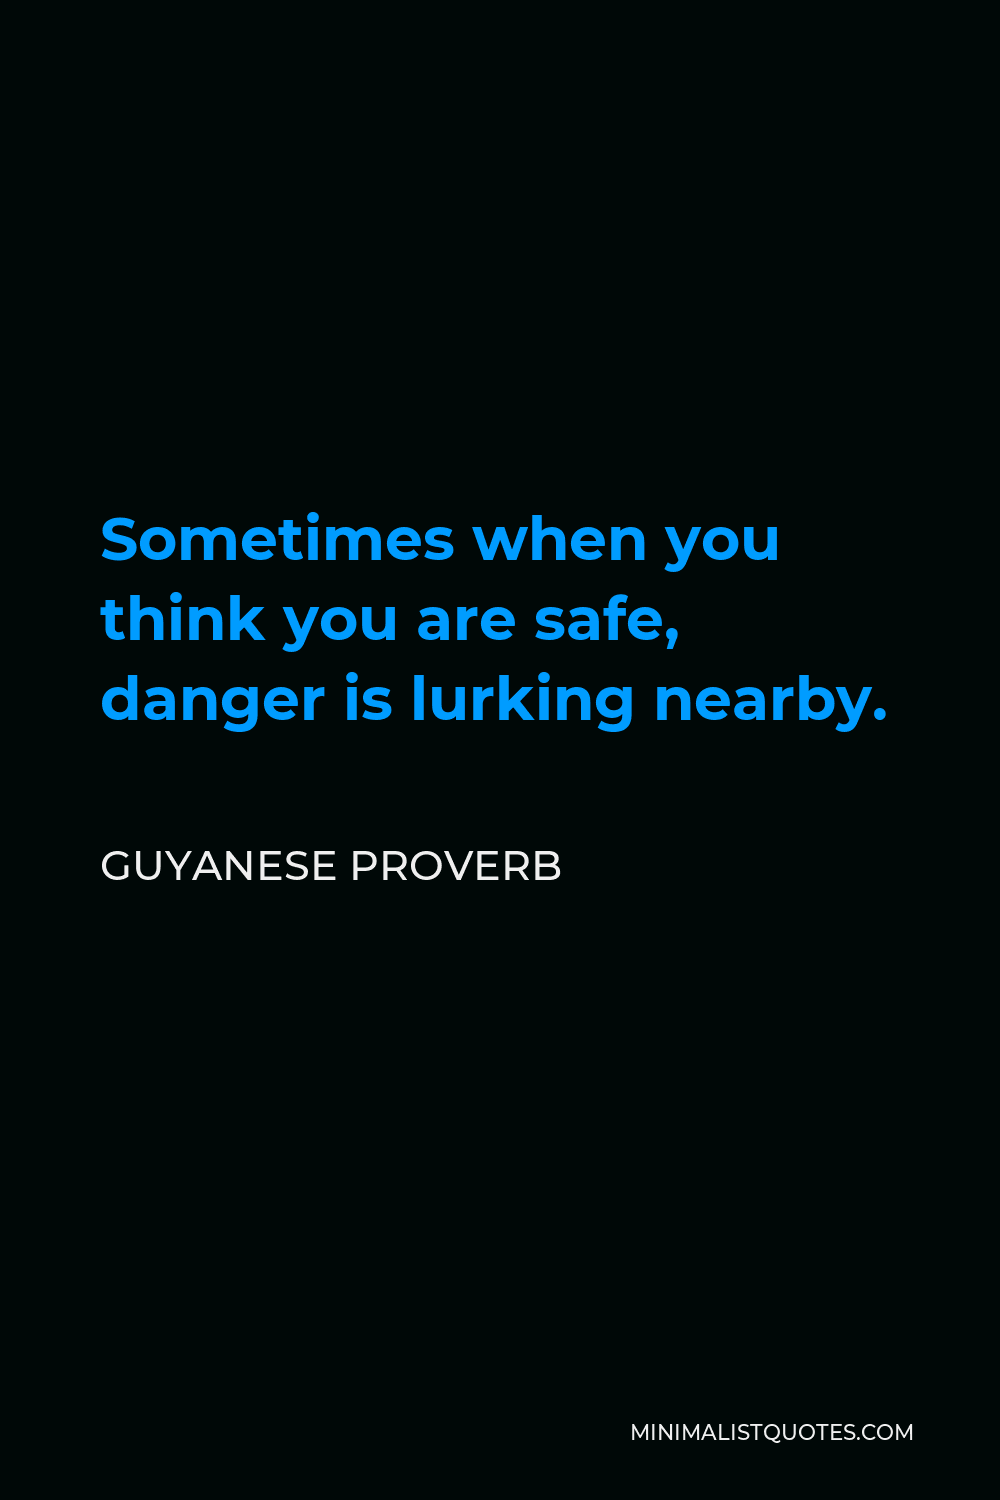 Guyanese Proverb Quote - Sometimes when you think you are safe, danger is lurking nearby.